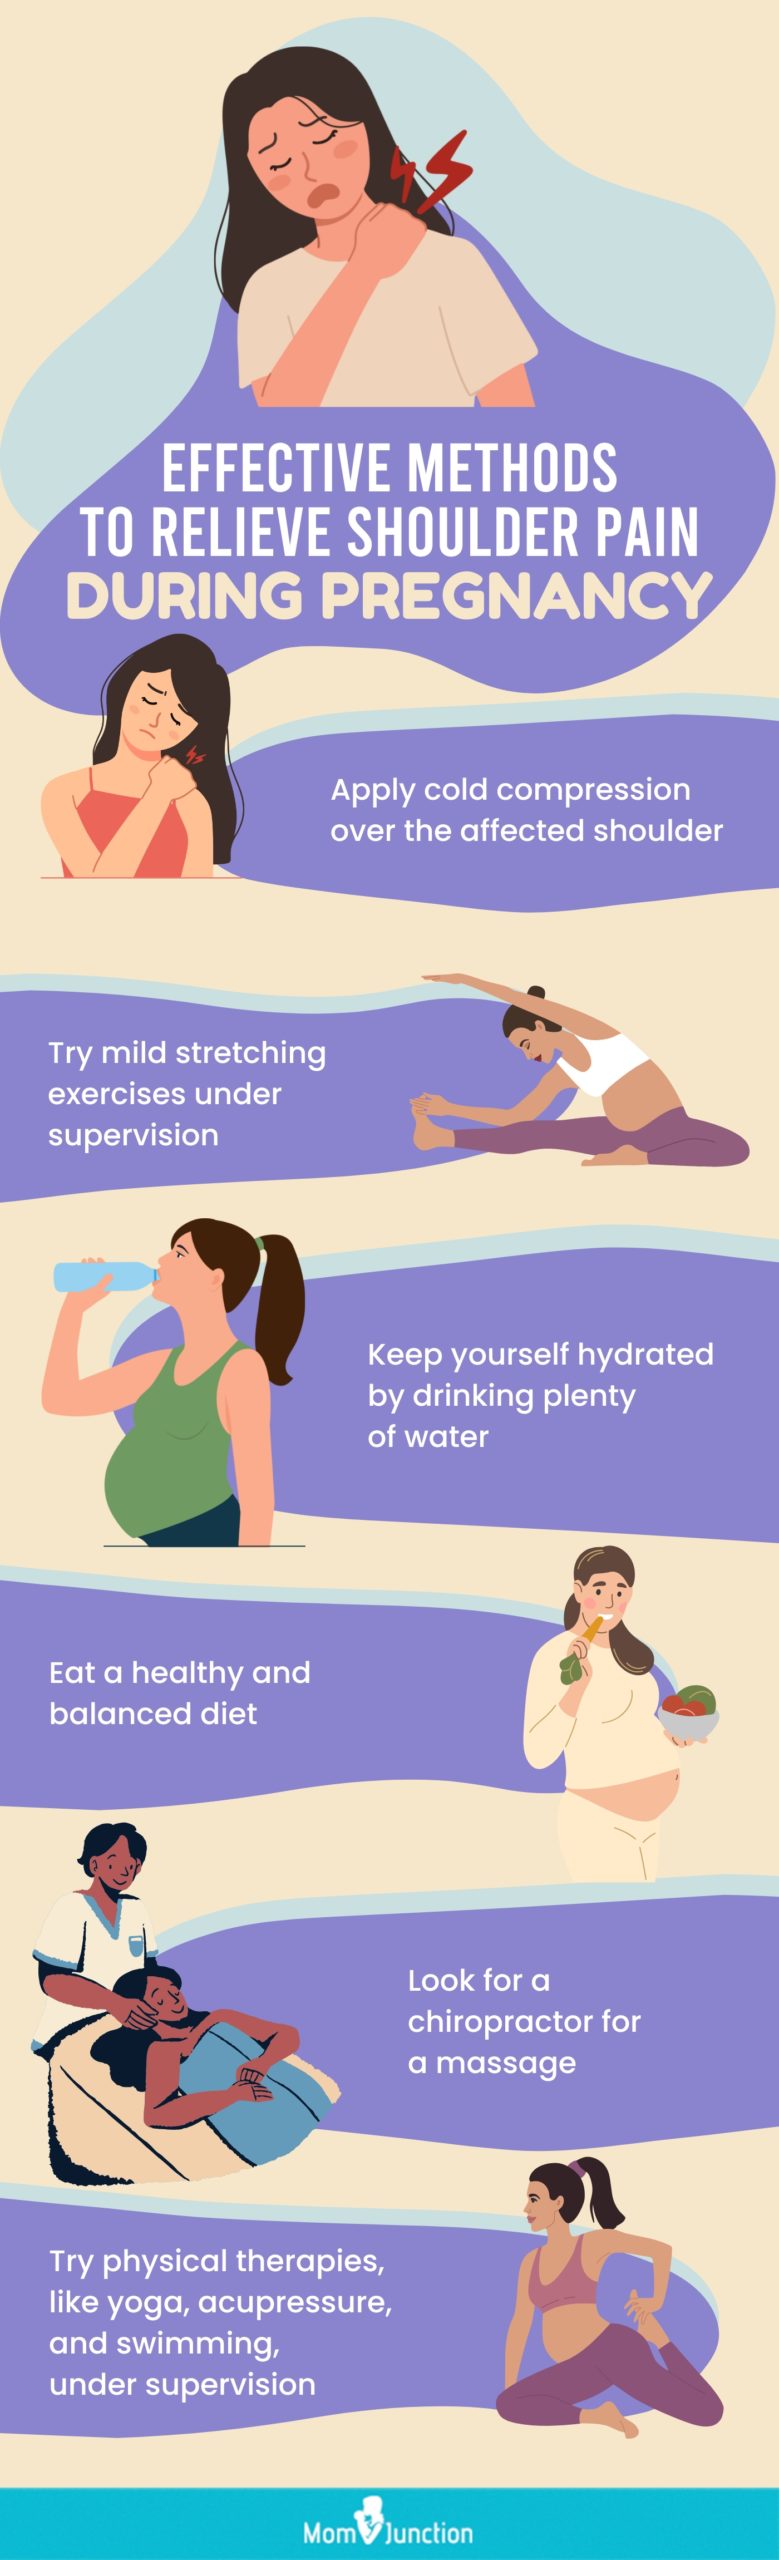 Tips to relieve back pain during pregnancy